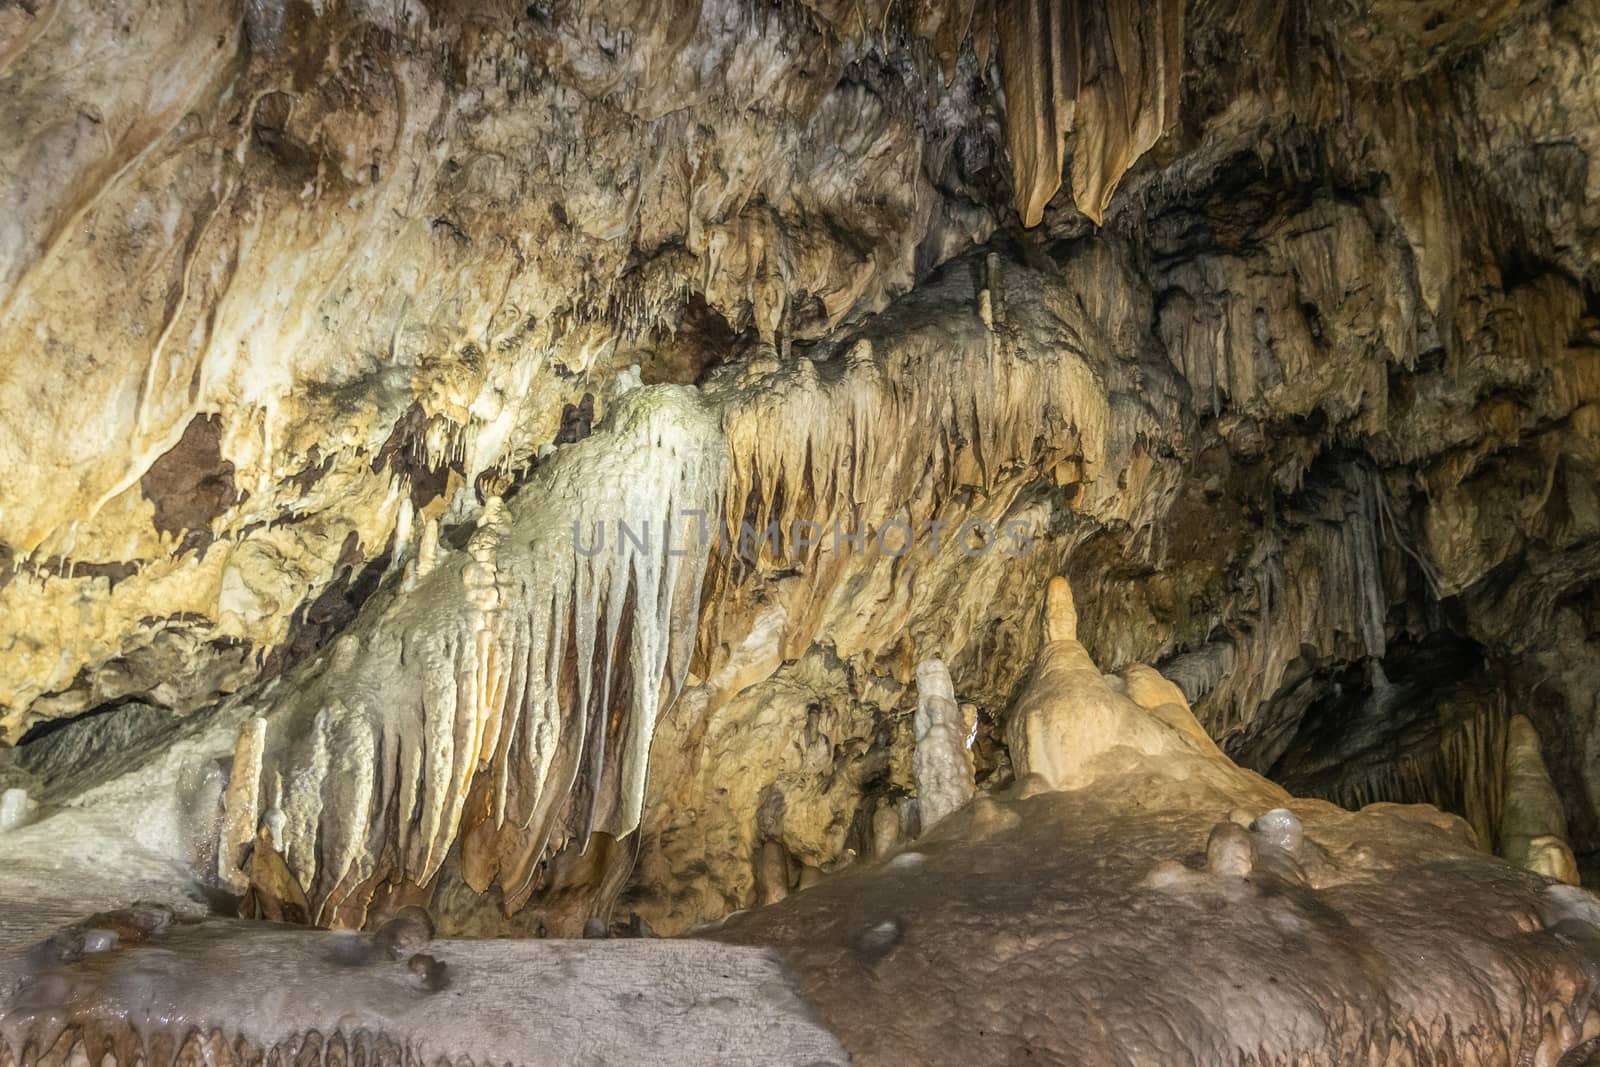 Han-sur-Lesse, Belgium - June 25, 2019: Grottes-de-Han 15 of 36. subterranean pictures of Stalagmites and stalactites in different shapes and colors throughout tunnels, caverns and large halls. Rock curtains.